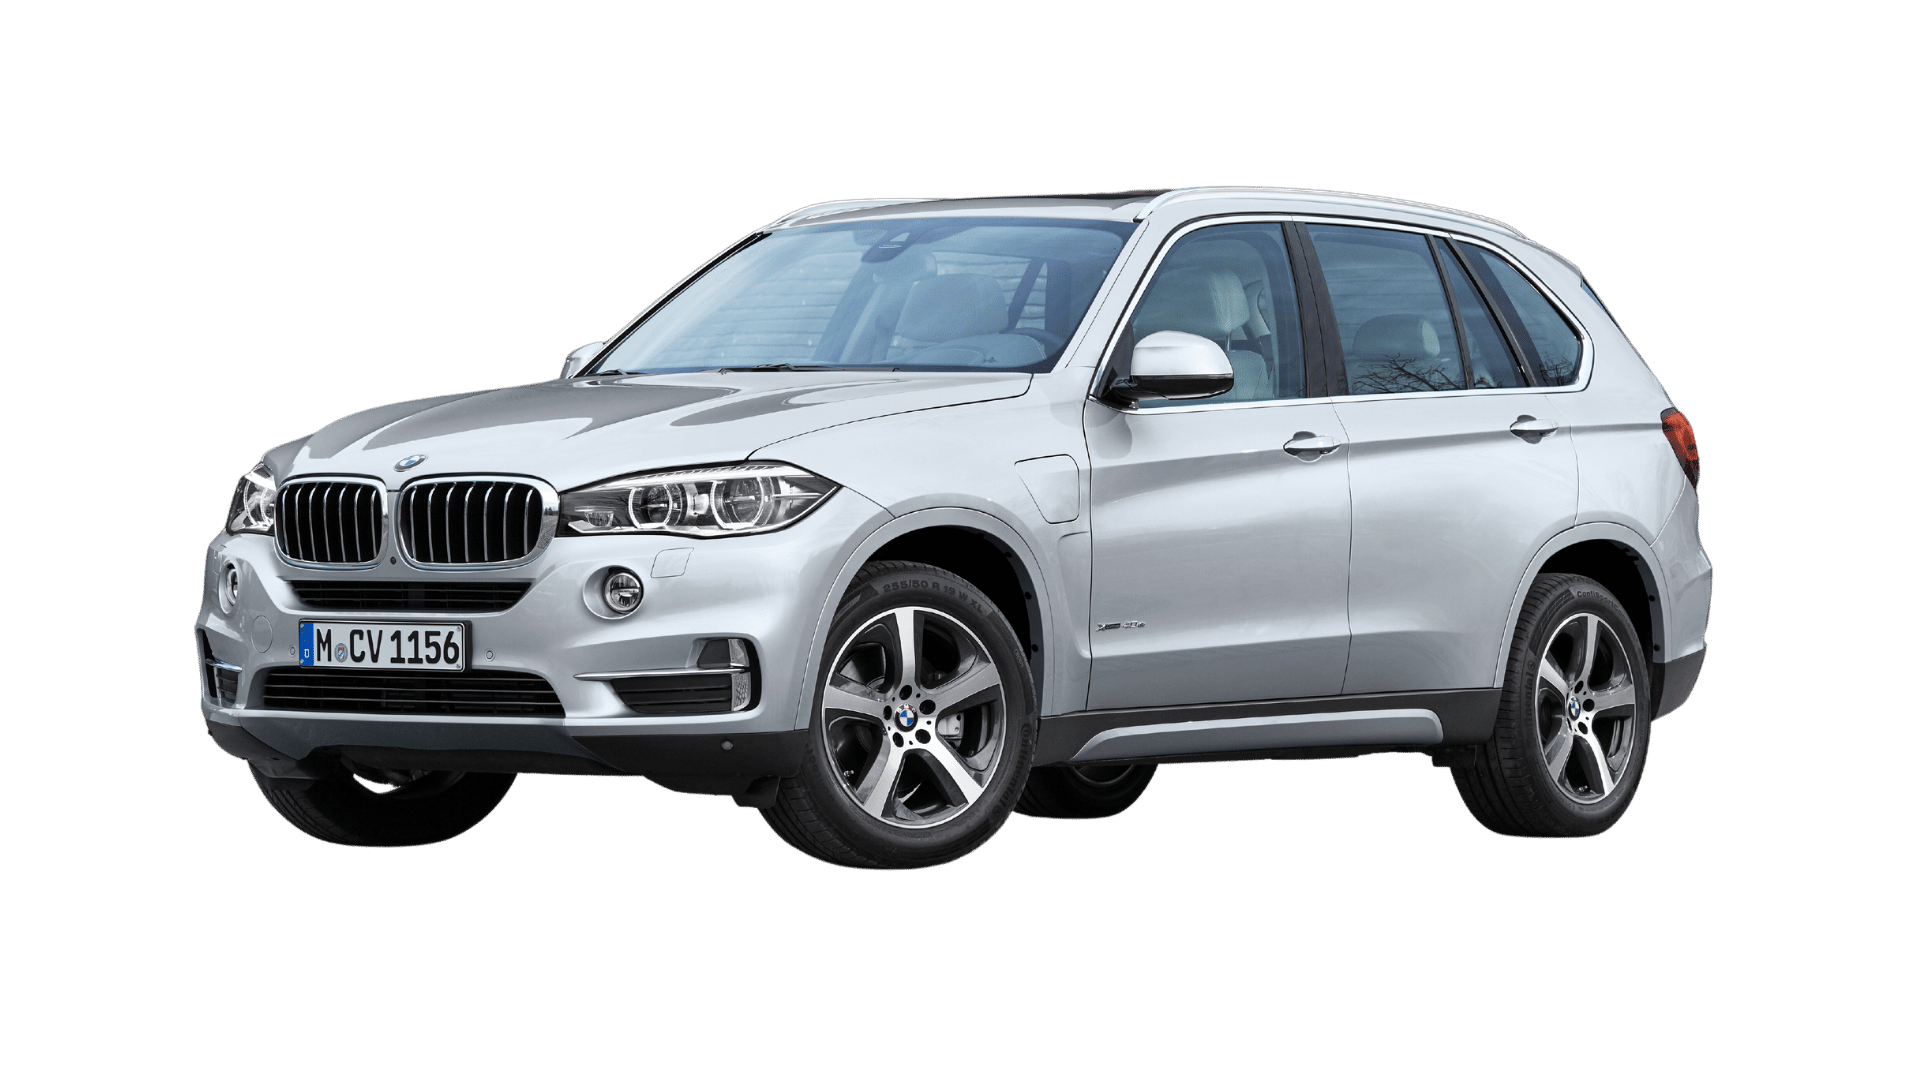 Charging your BMW X5